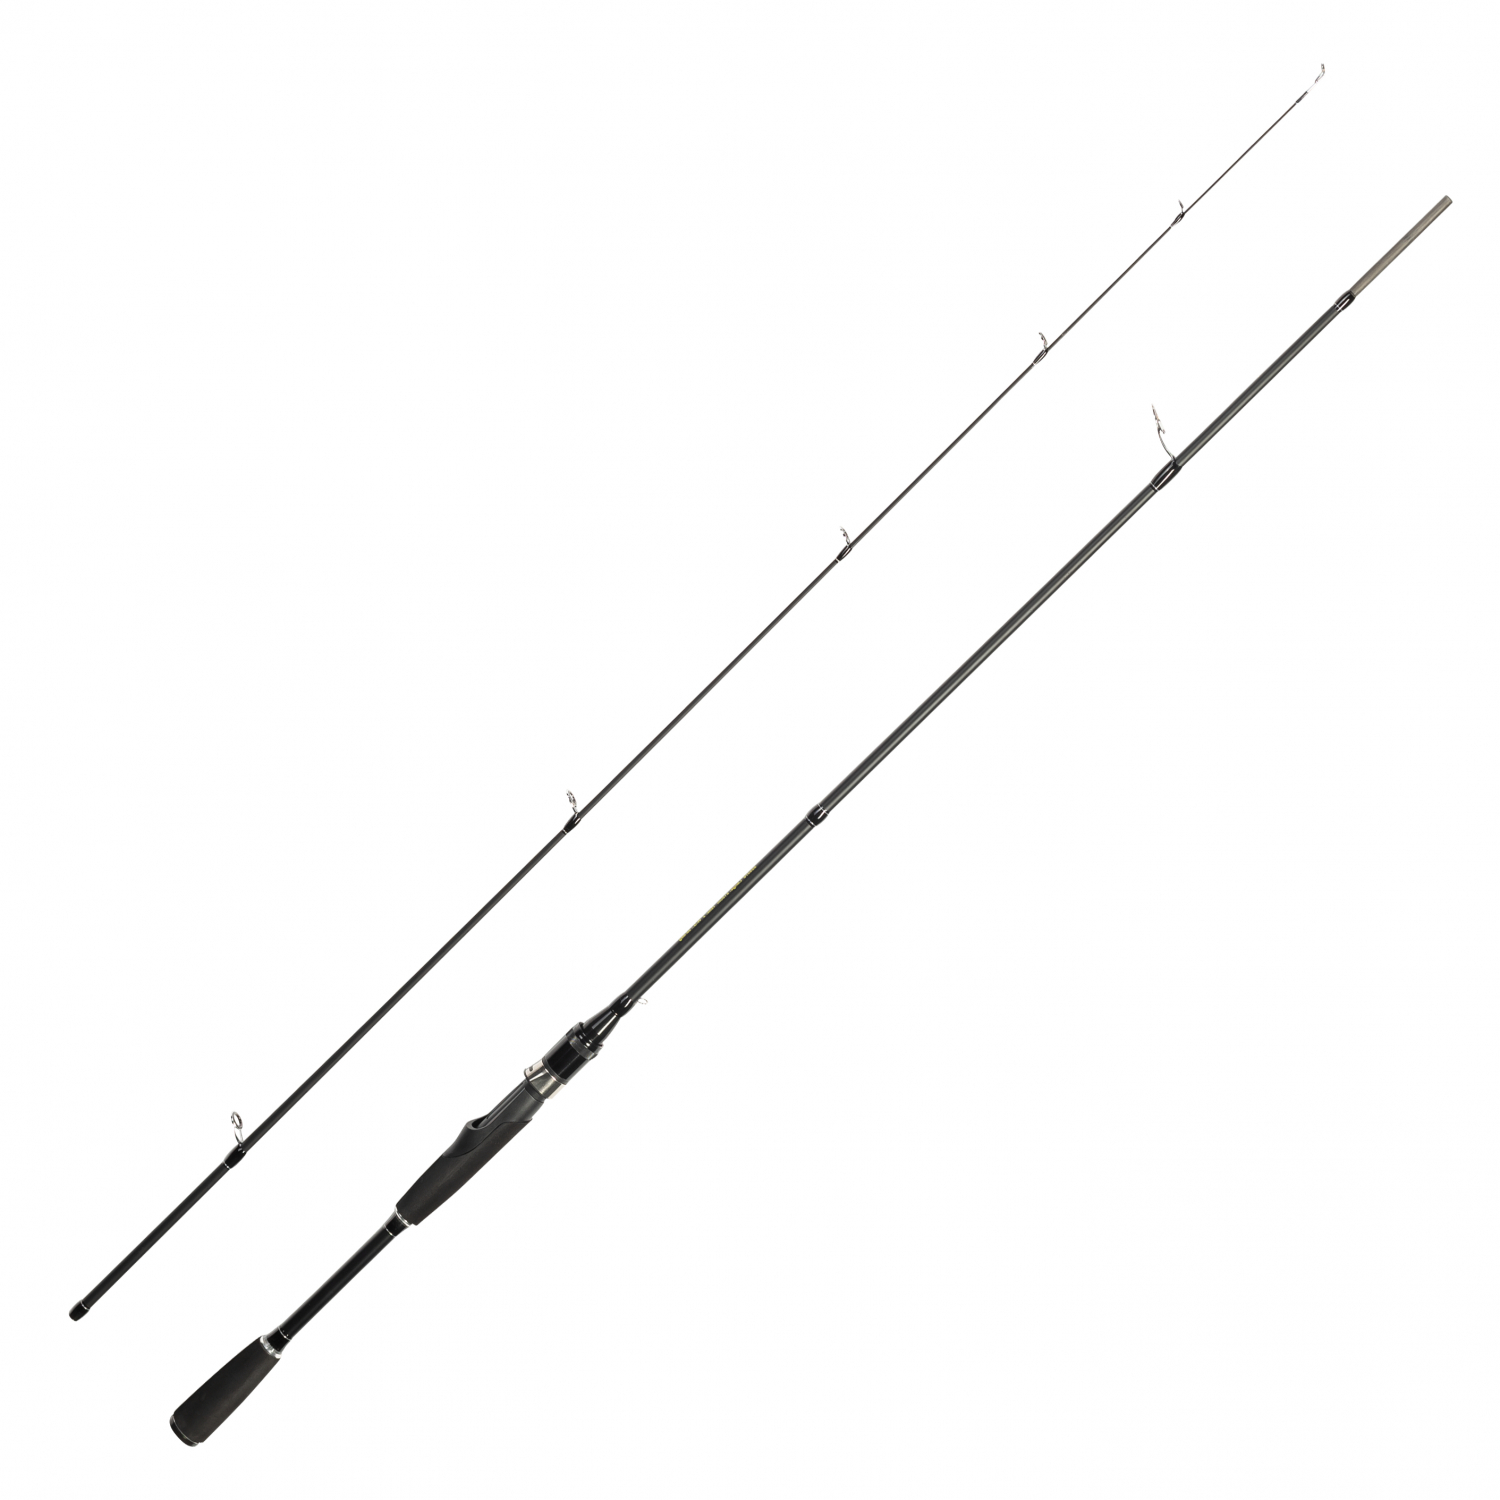 Kogha Predator Rod Dreamcast Shad at low prices